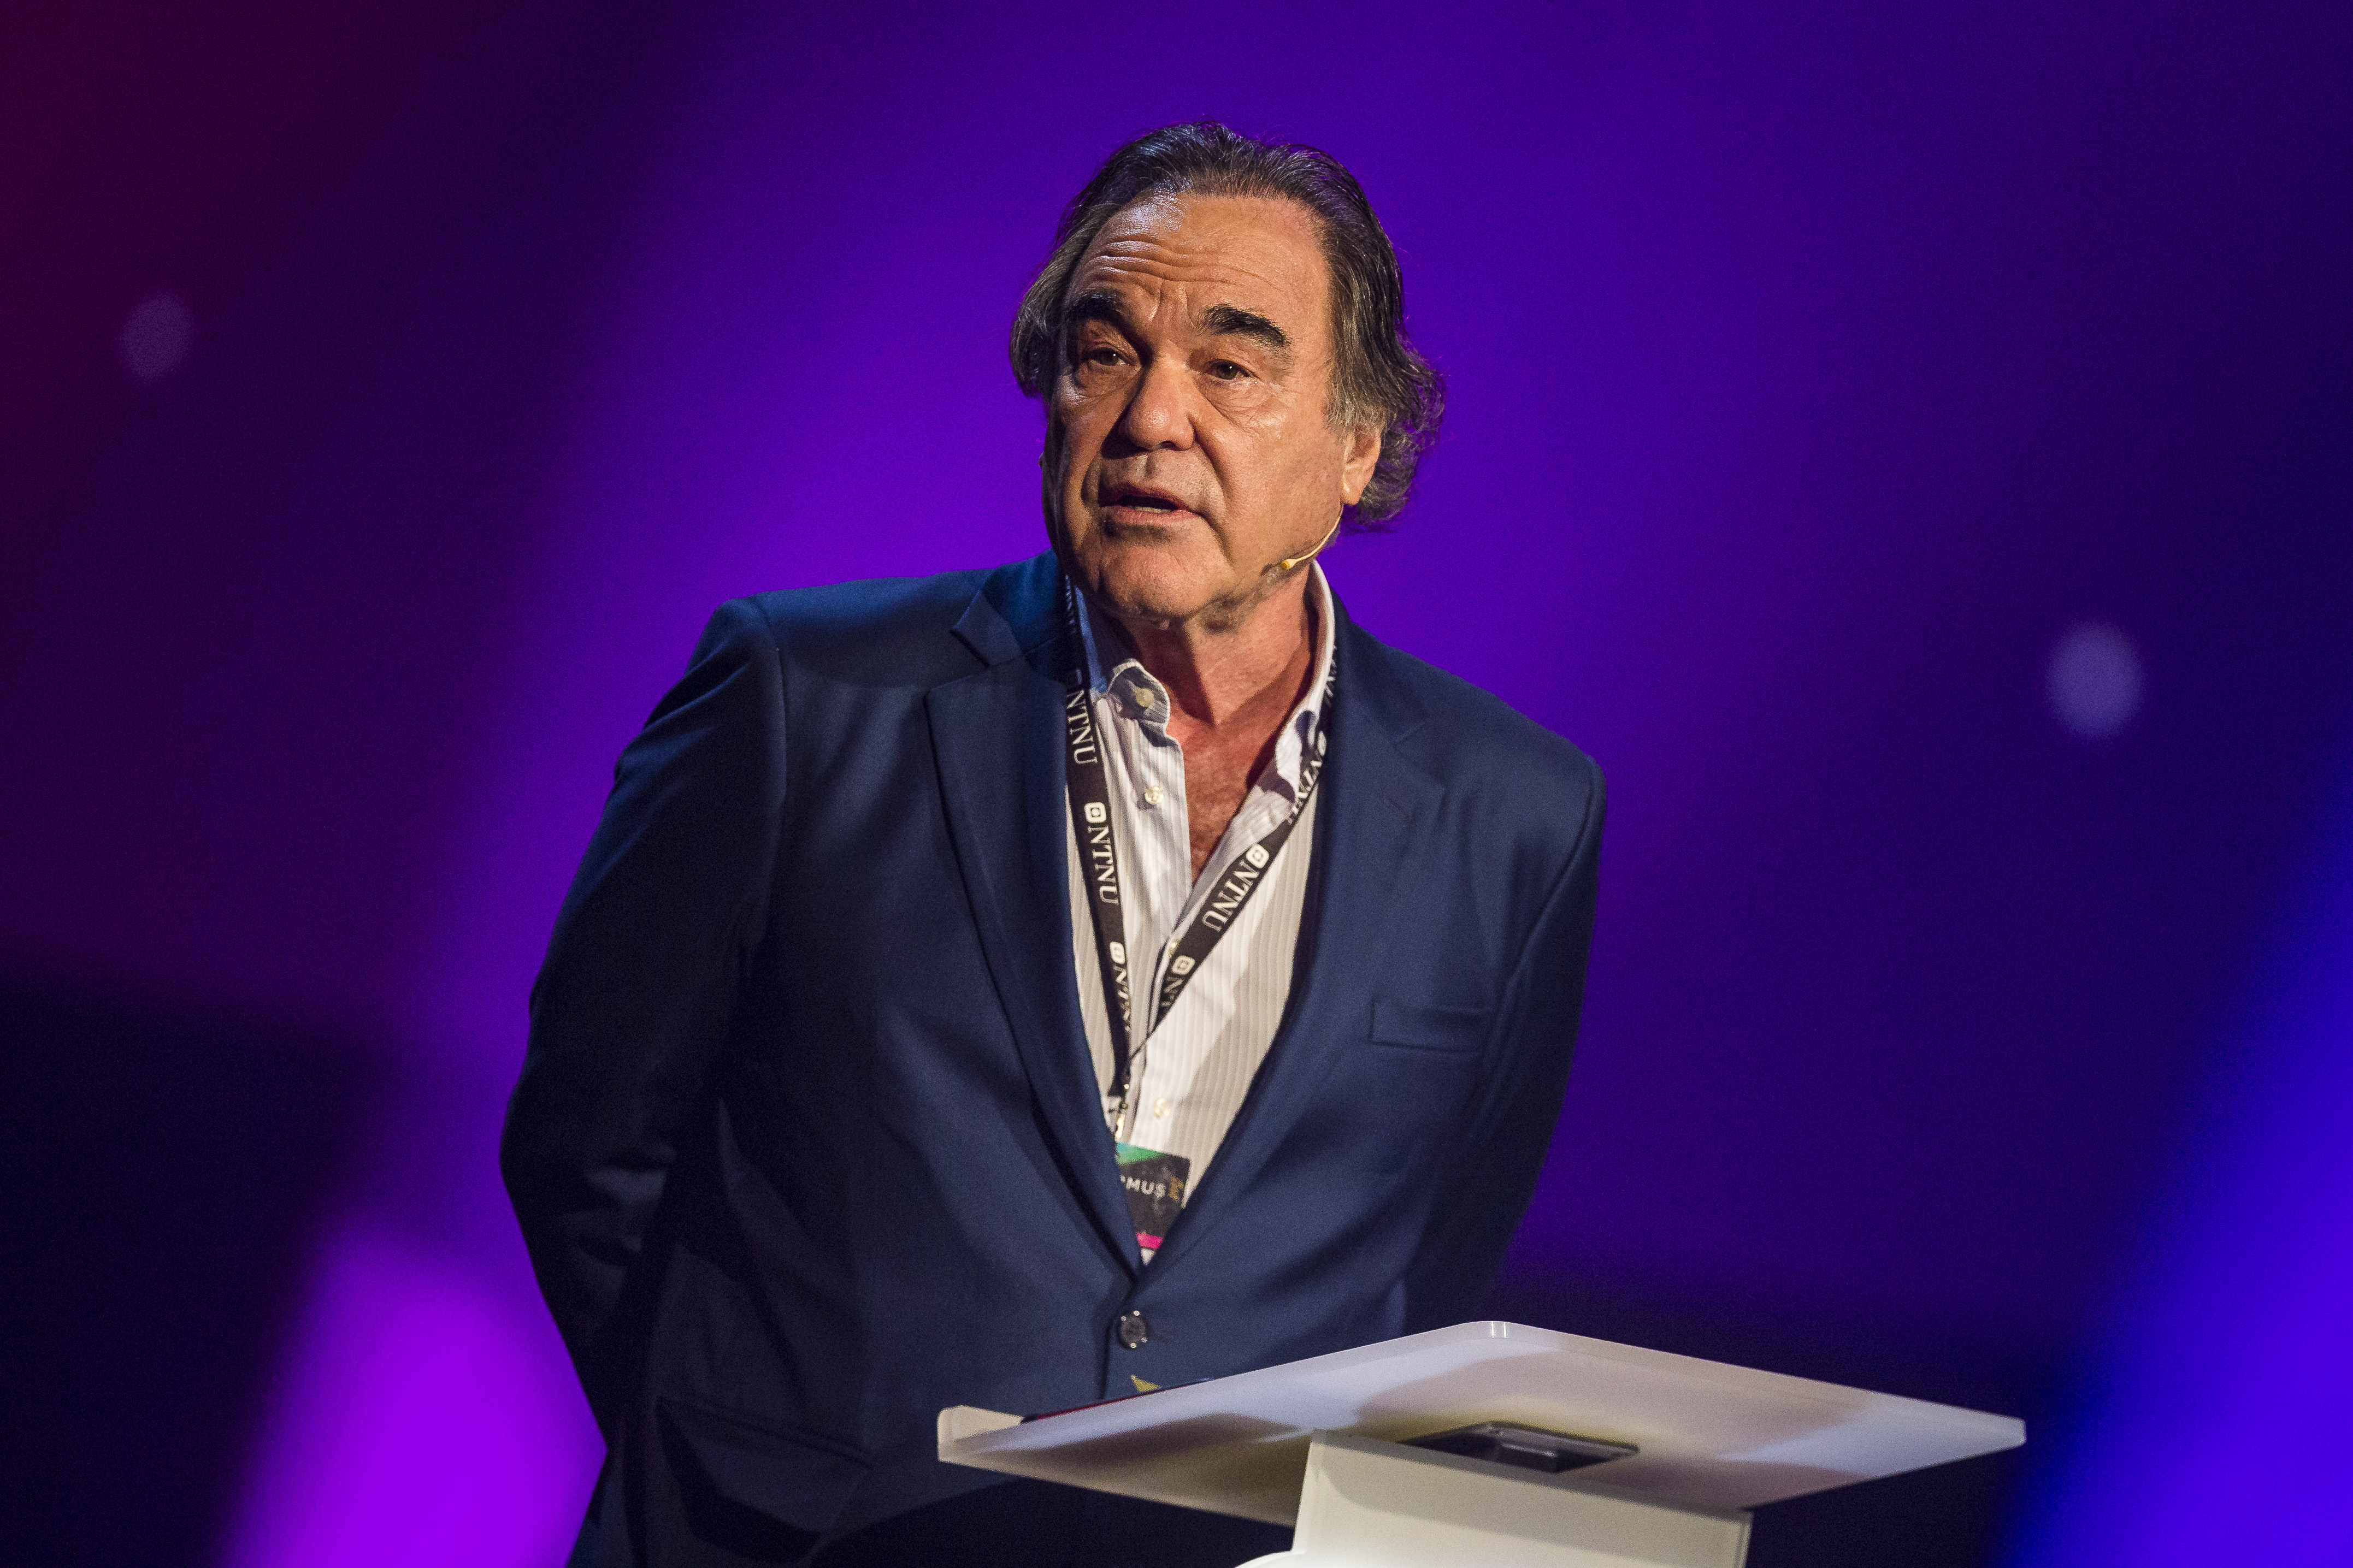 TRONDHEIM, NORWAY - JUNE 21: Oliver Stone gives a speech on truth in film during the Starmus Festival on June 21, 2017 in Trondheim, Norway. (Photo by MICHAEL CAMPANELLA/WireImage) (MICHAEL CAMPANELLA—WireImage)